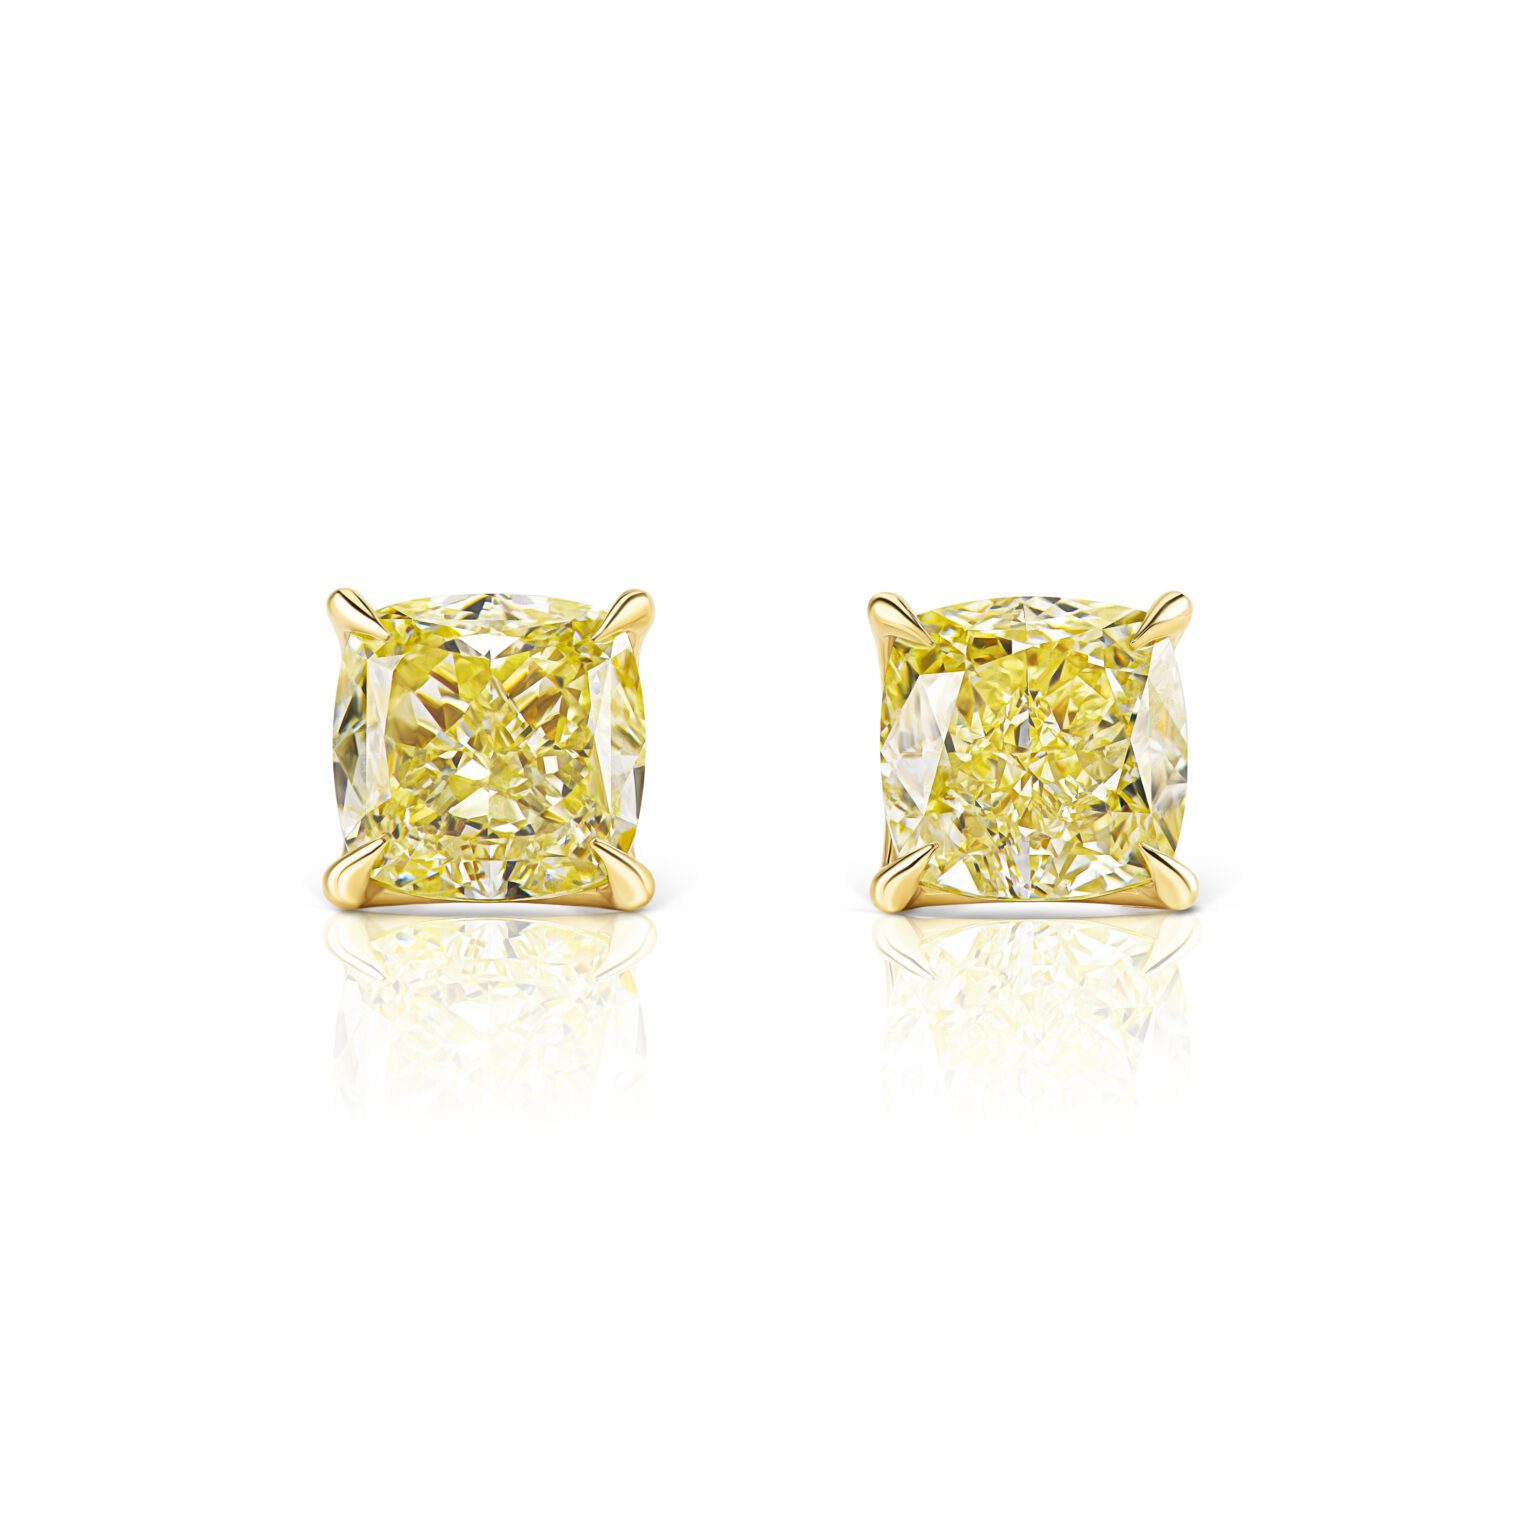 Yellow diamond stud earings with a total weight of 2.14 ct